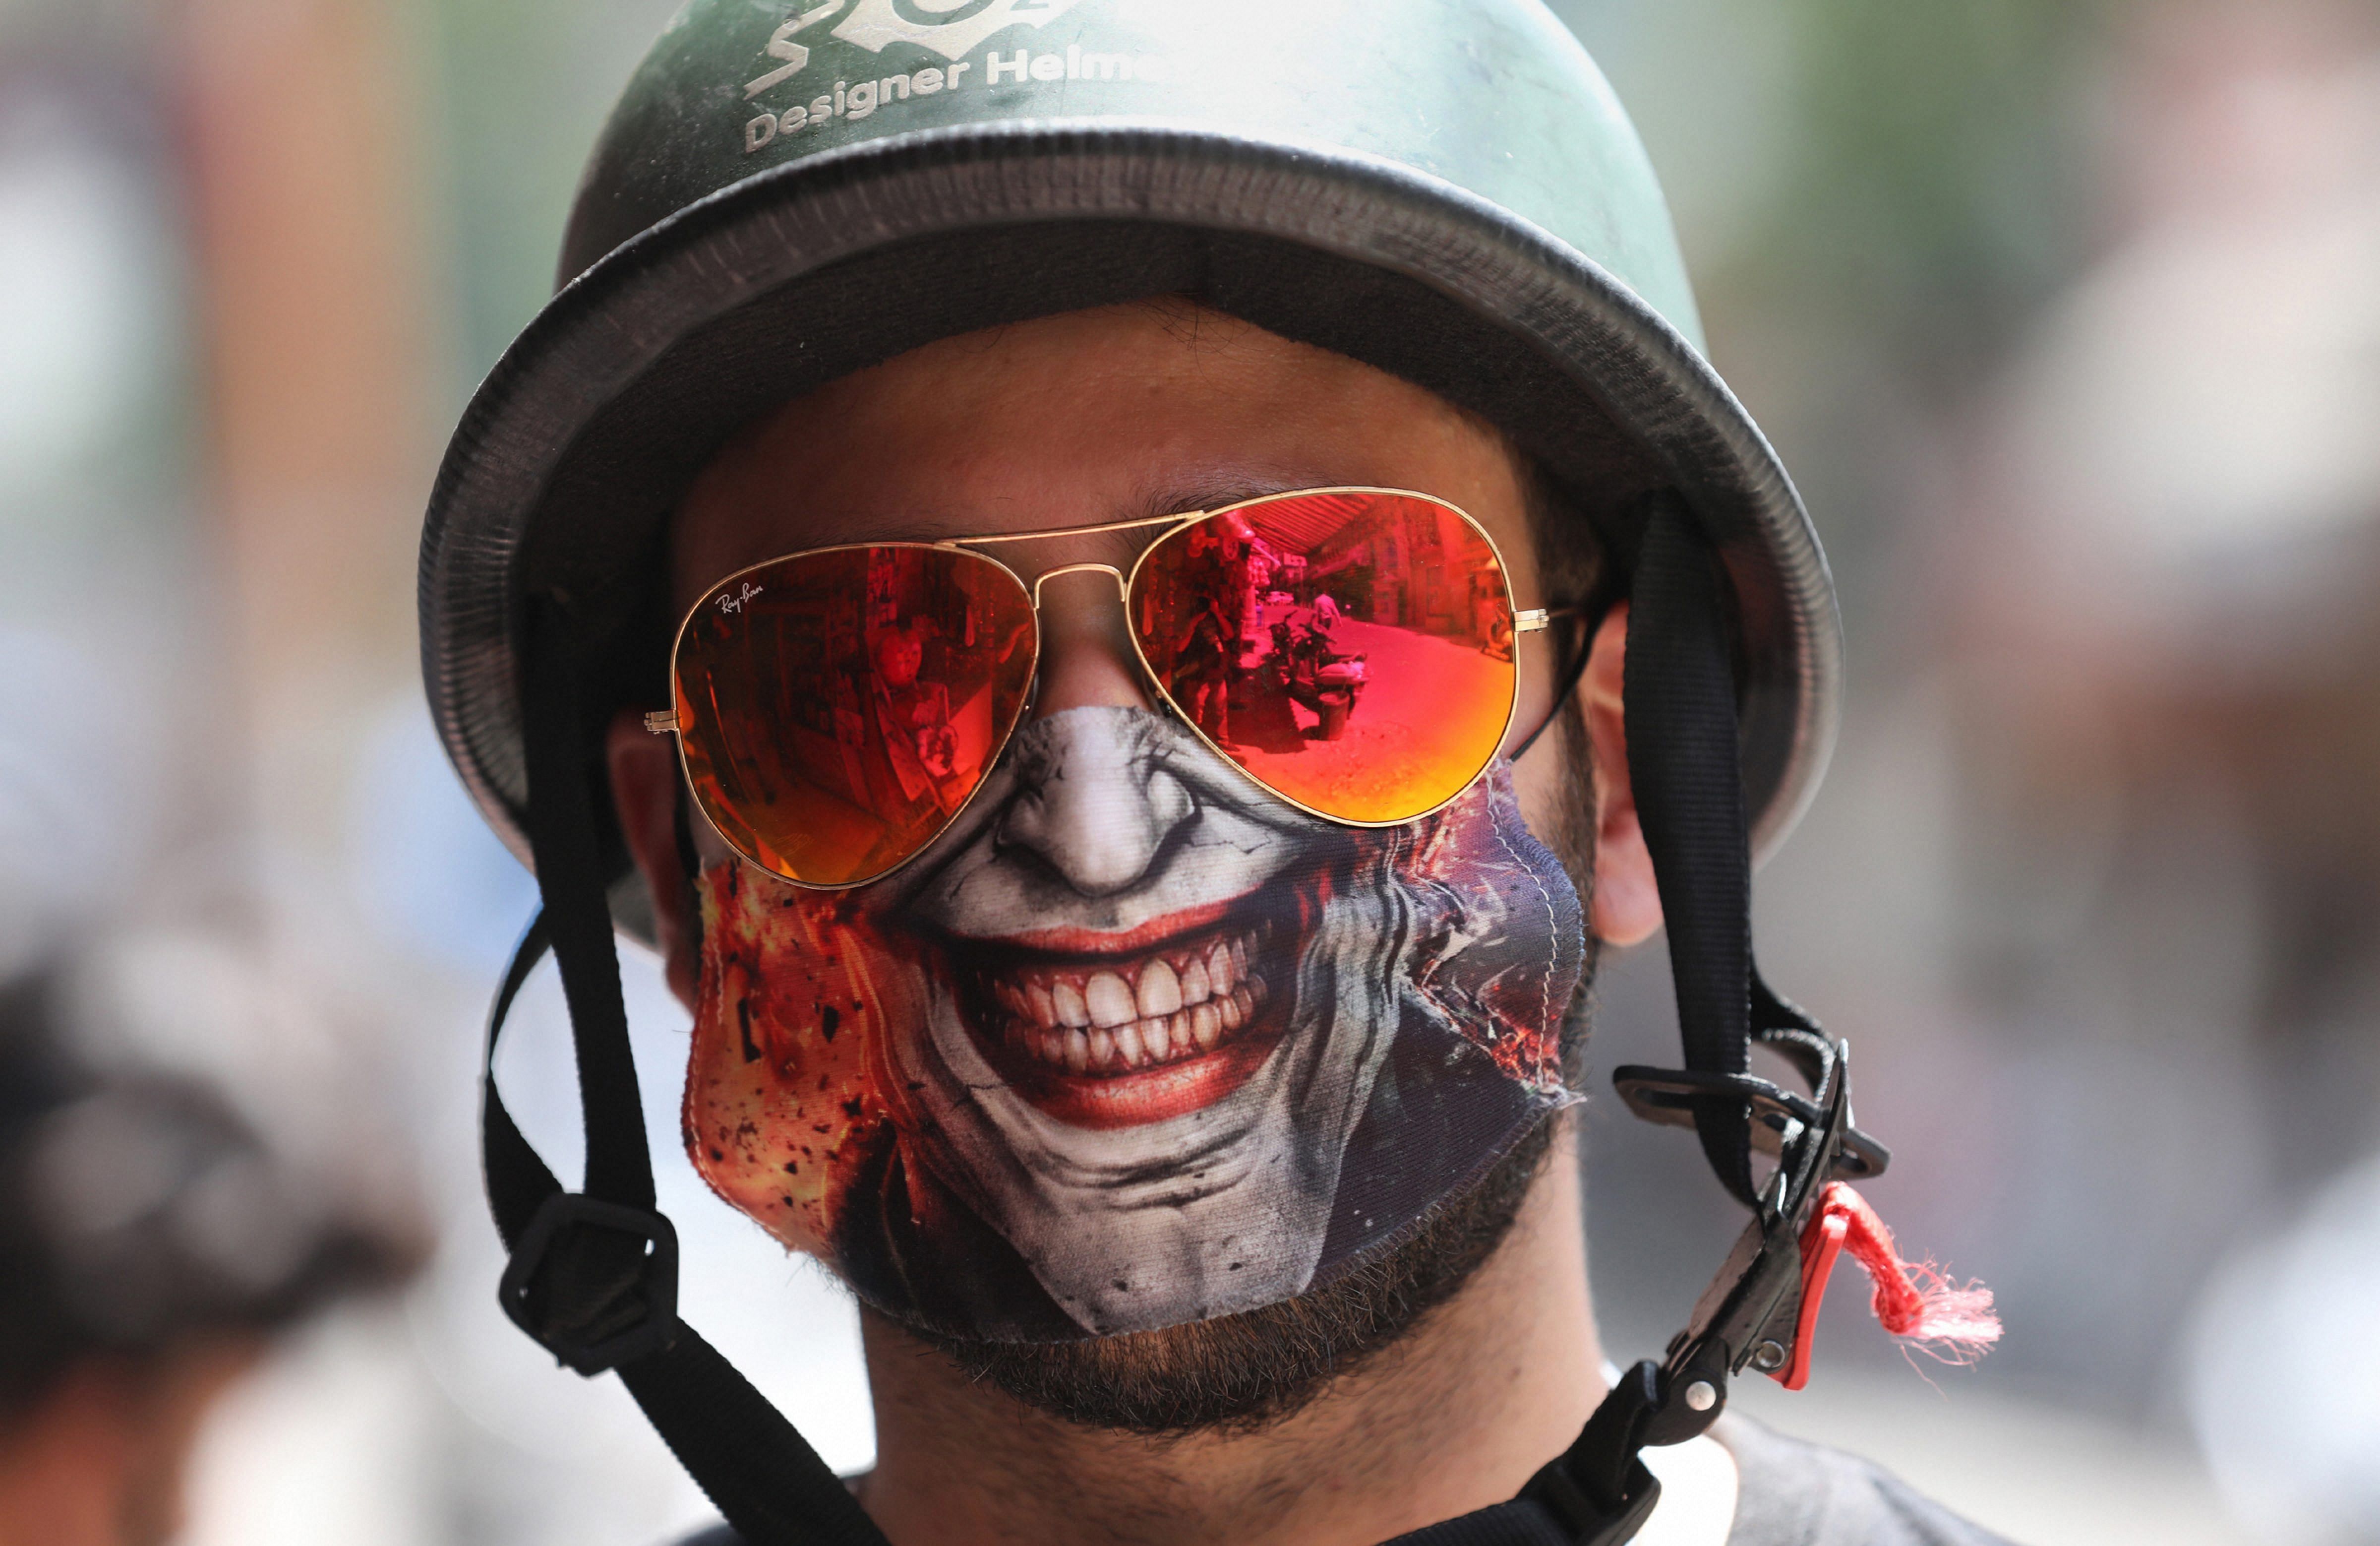 A youngster wearing a designer face mask poses for photographs, during the ongoing COVID-19 nationwide lockdown, in Jammu. Credit: PTI Photo